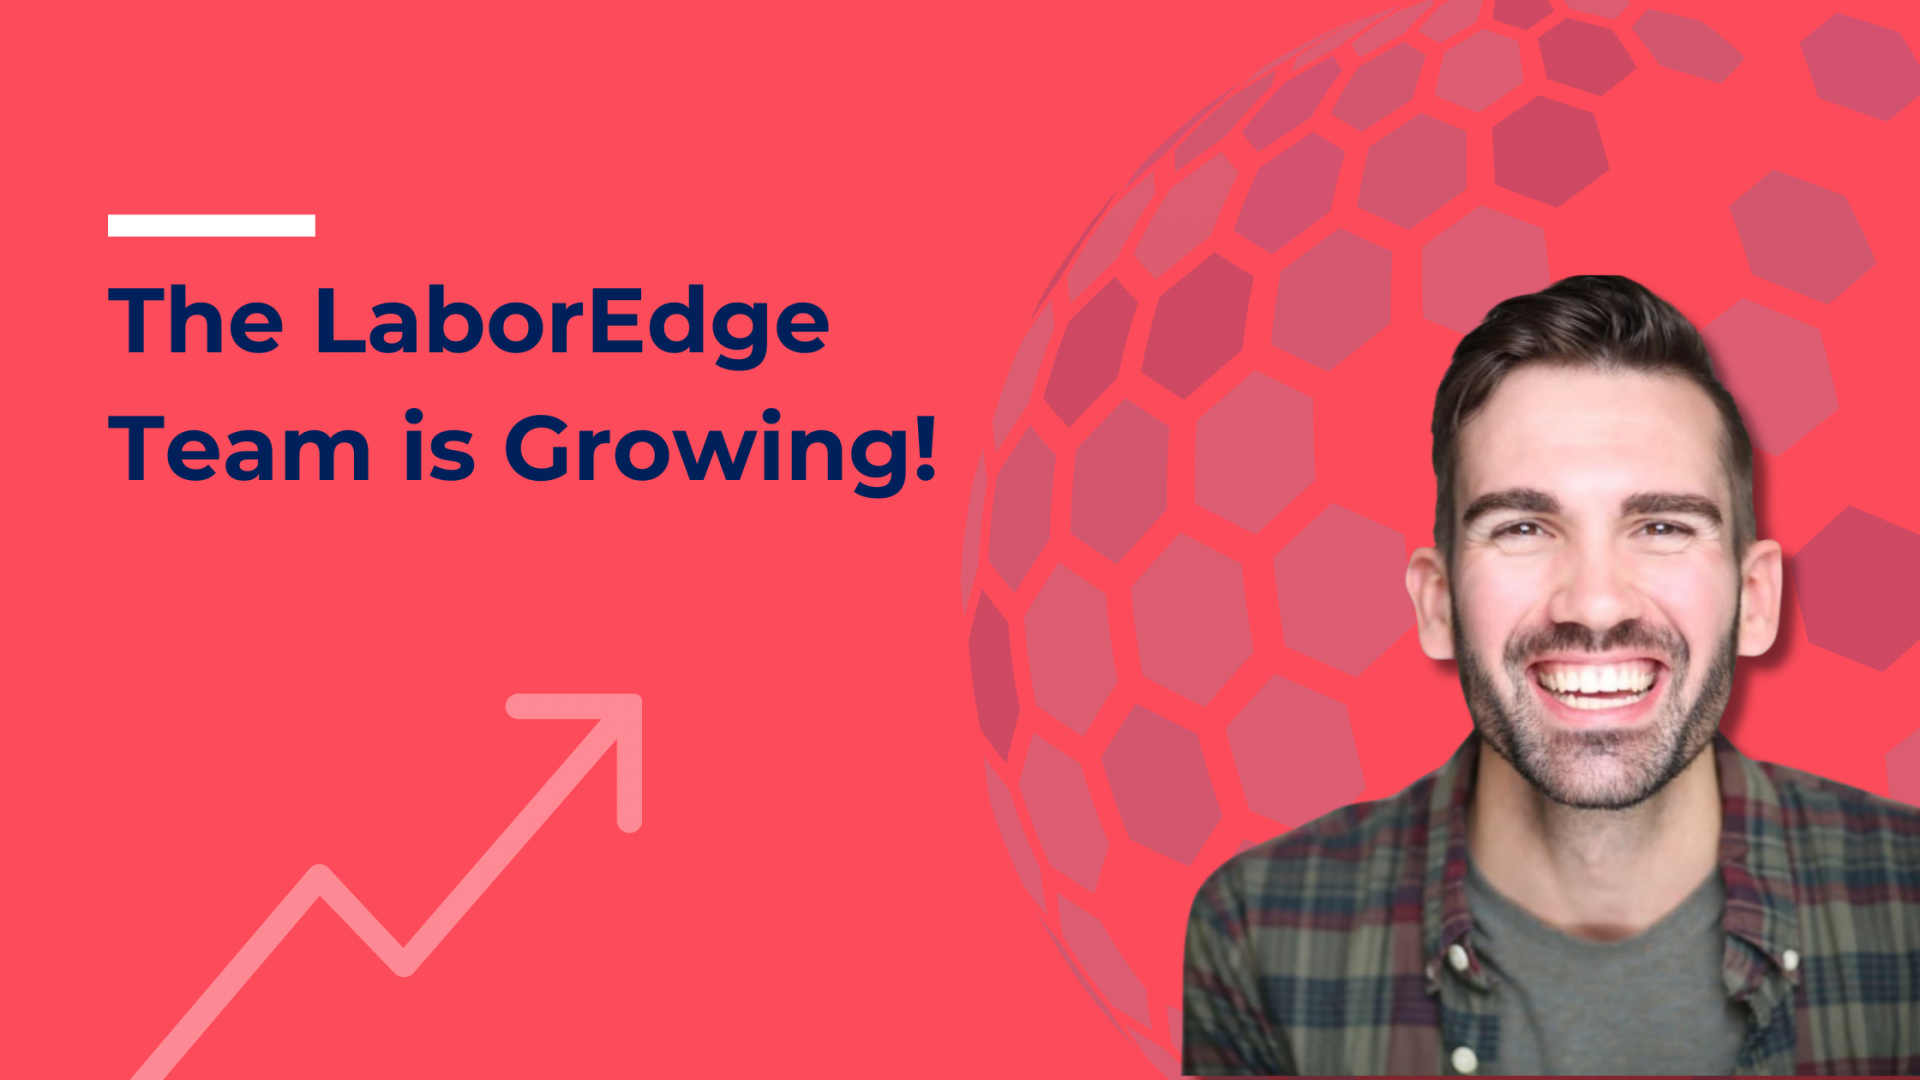 The LaborEdge Team is Growing!